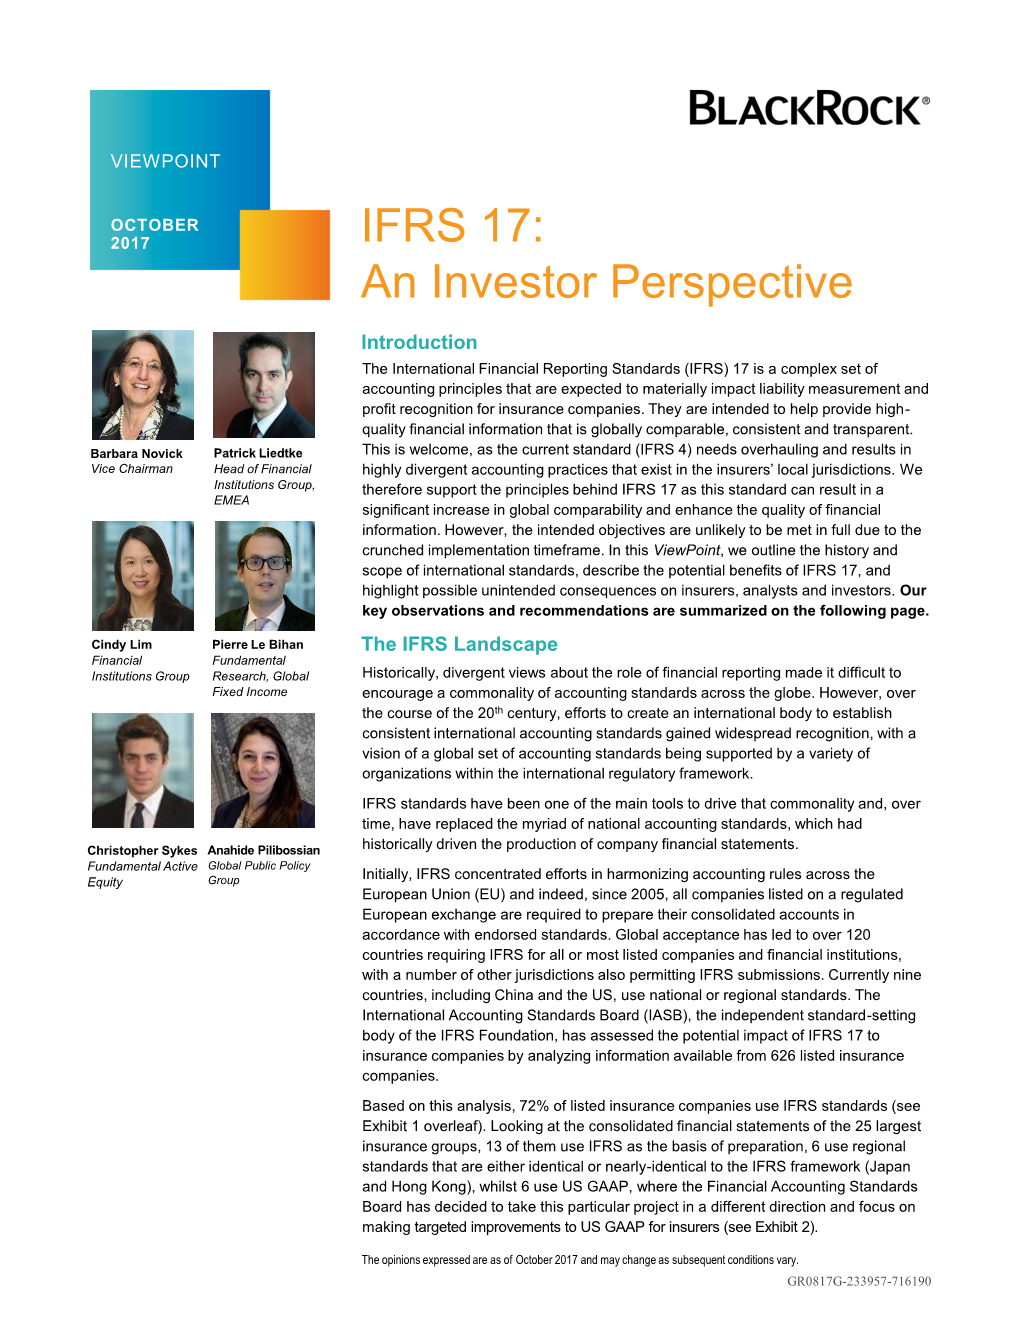 IFRS 17: an Investor Perspective